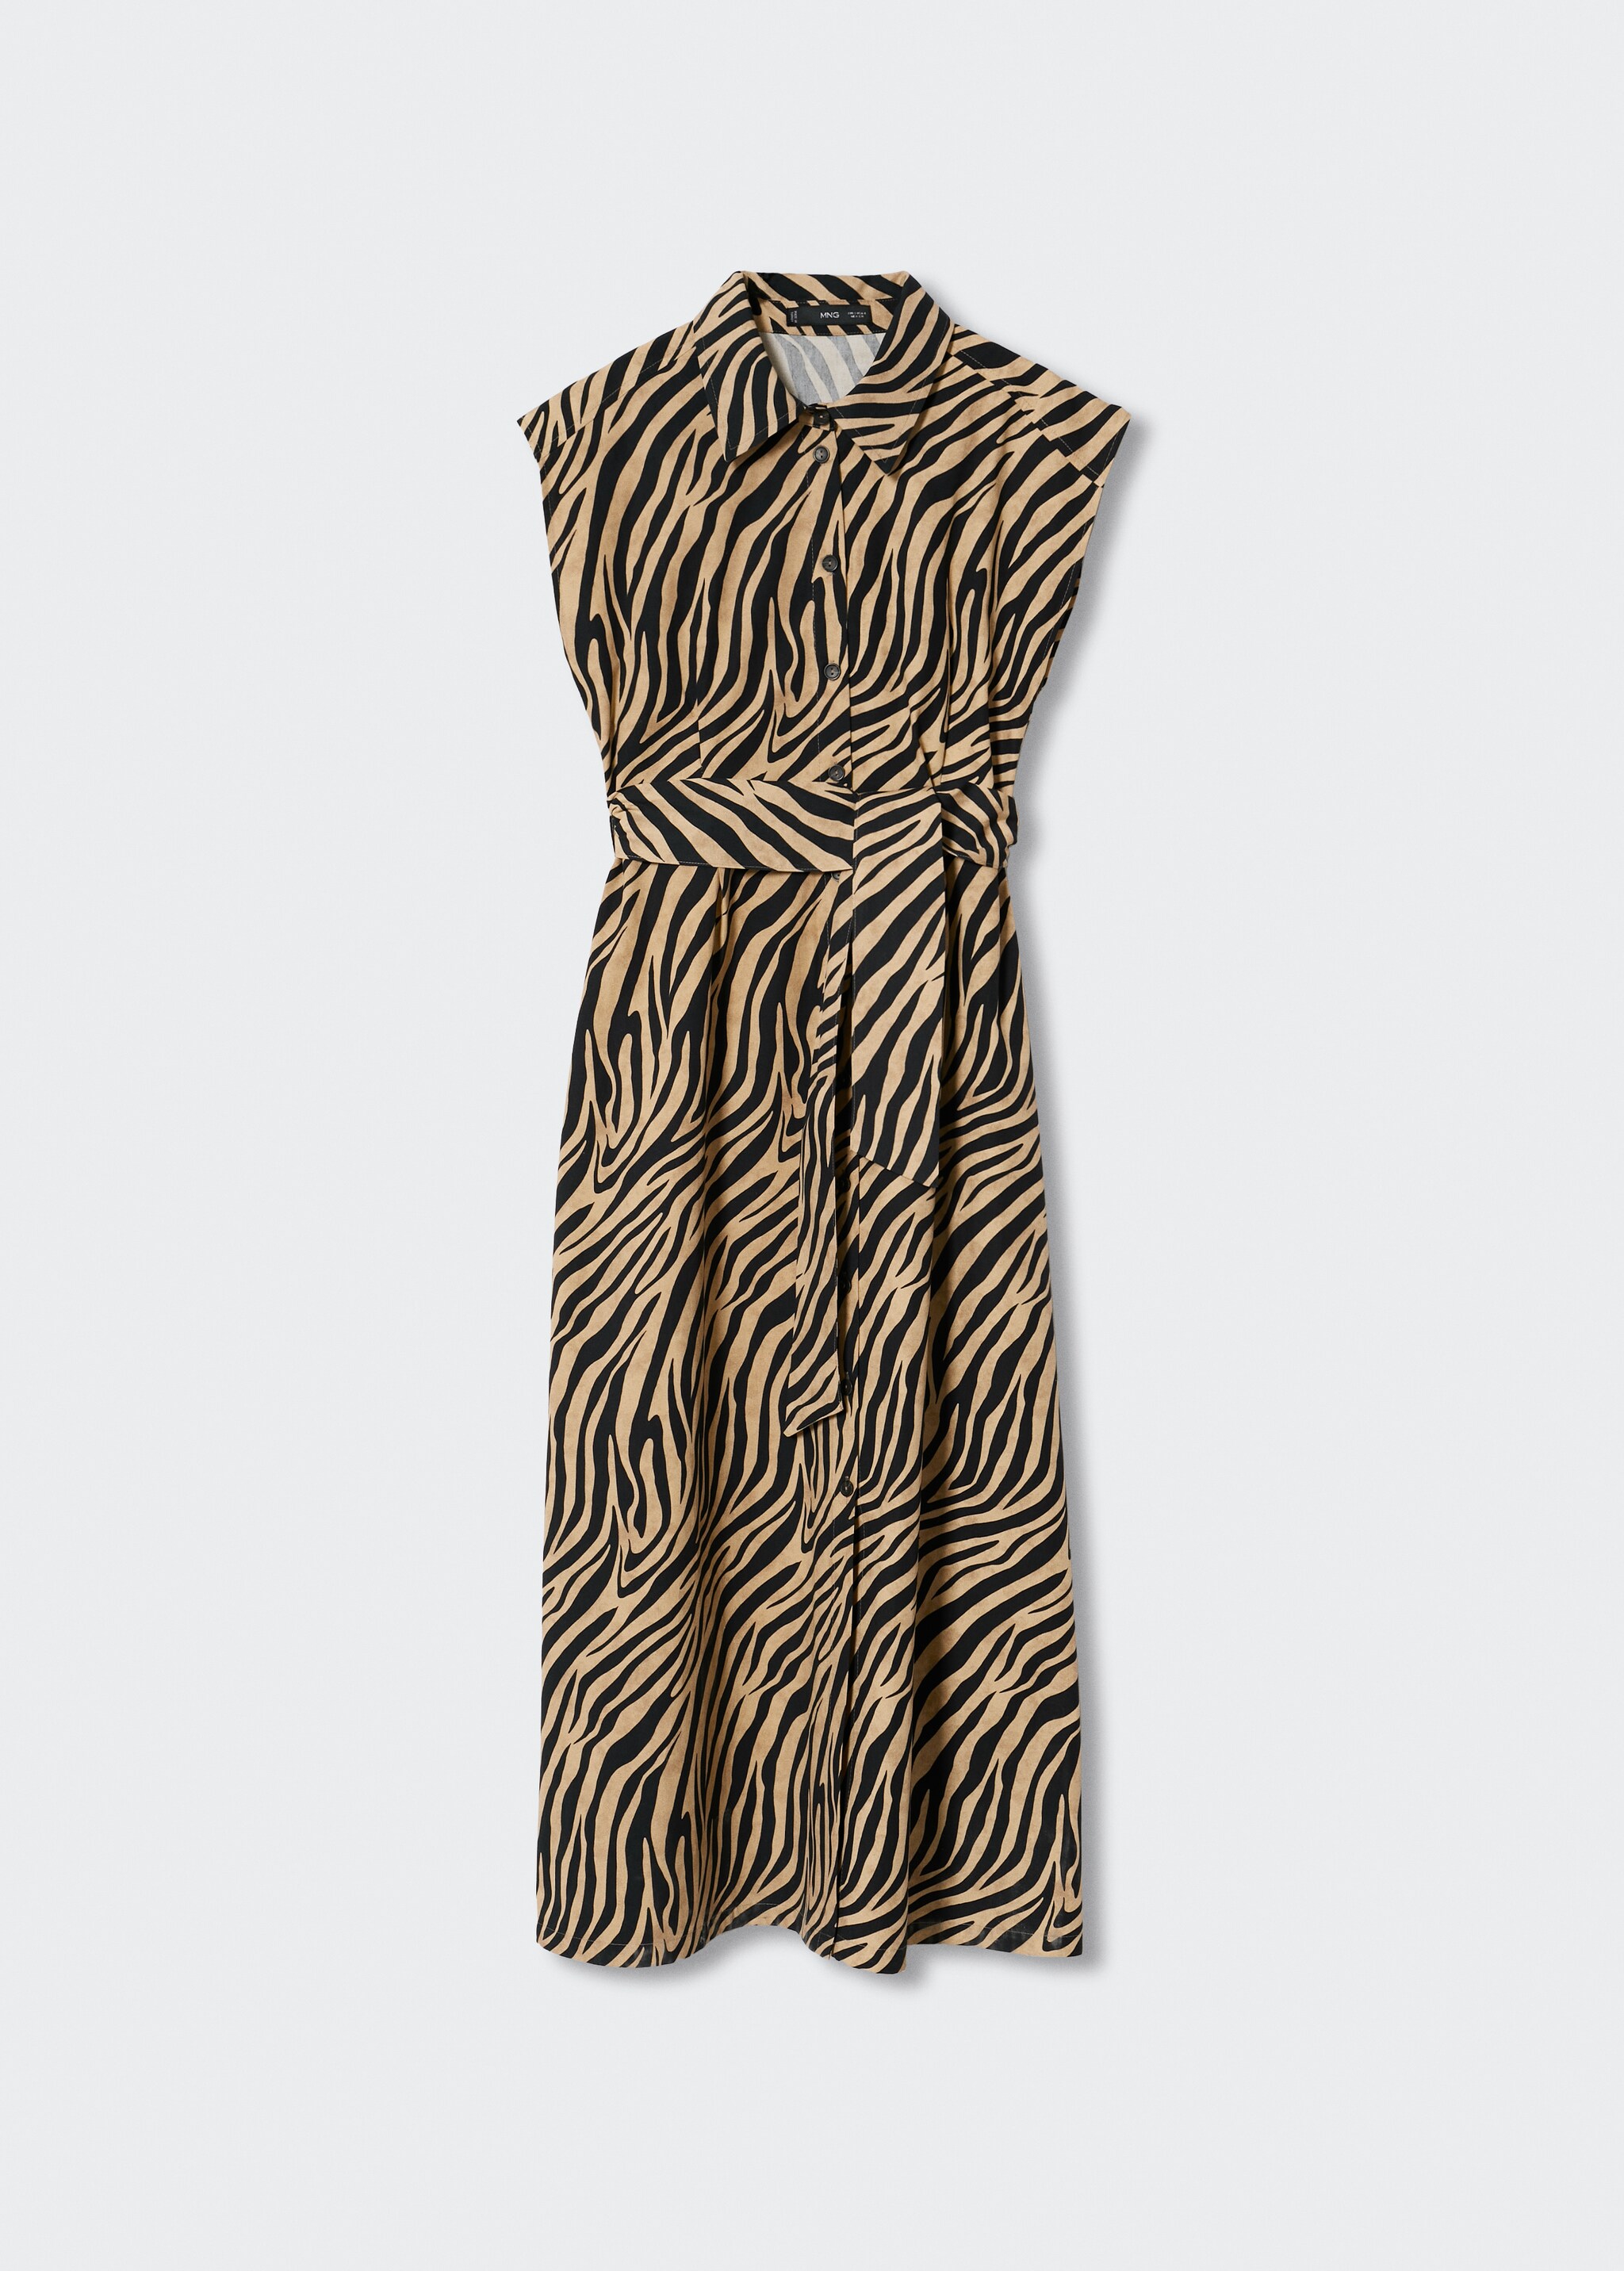 Animal print dress - Article without model